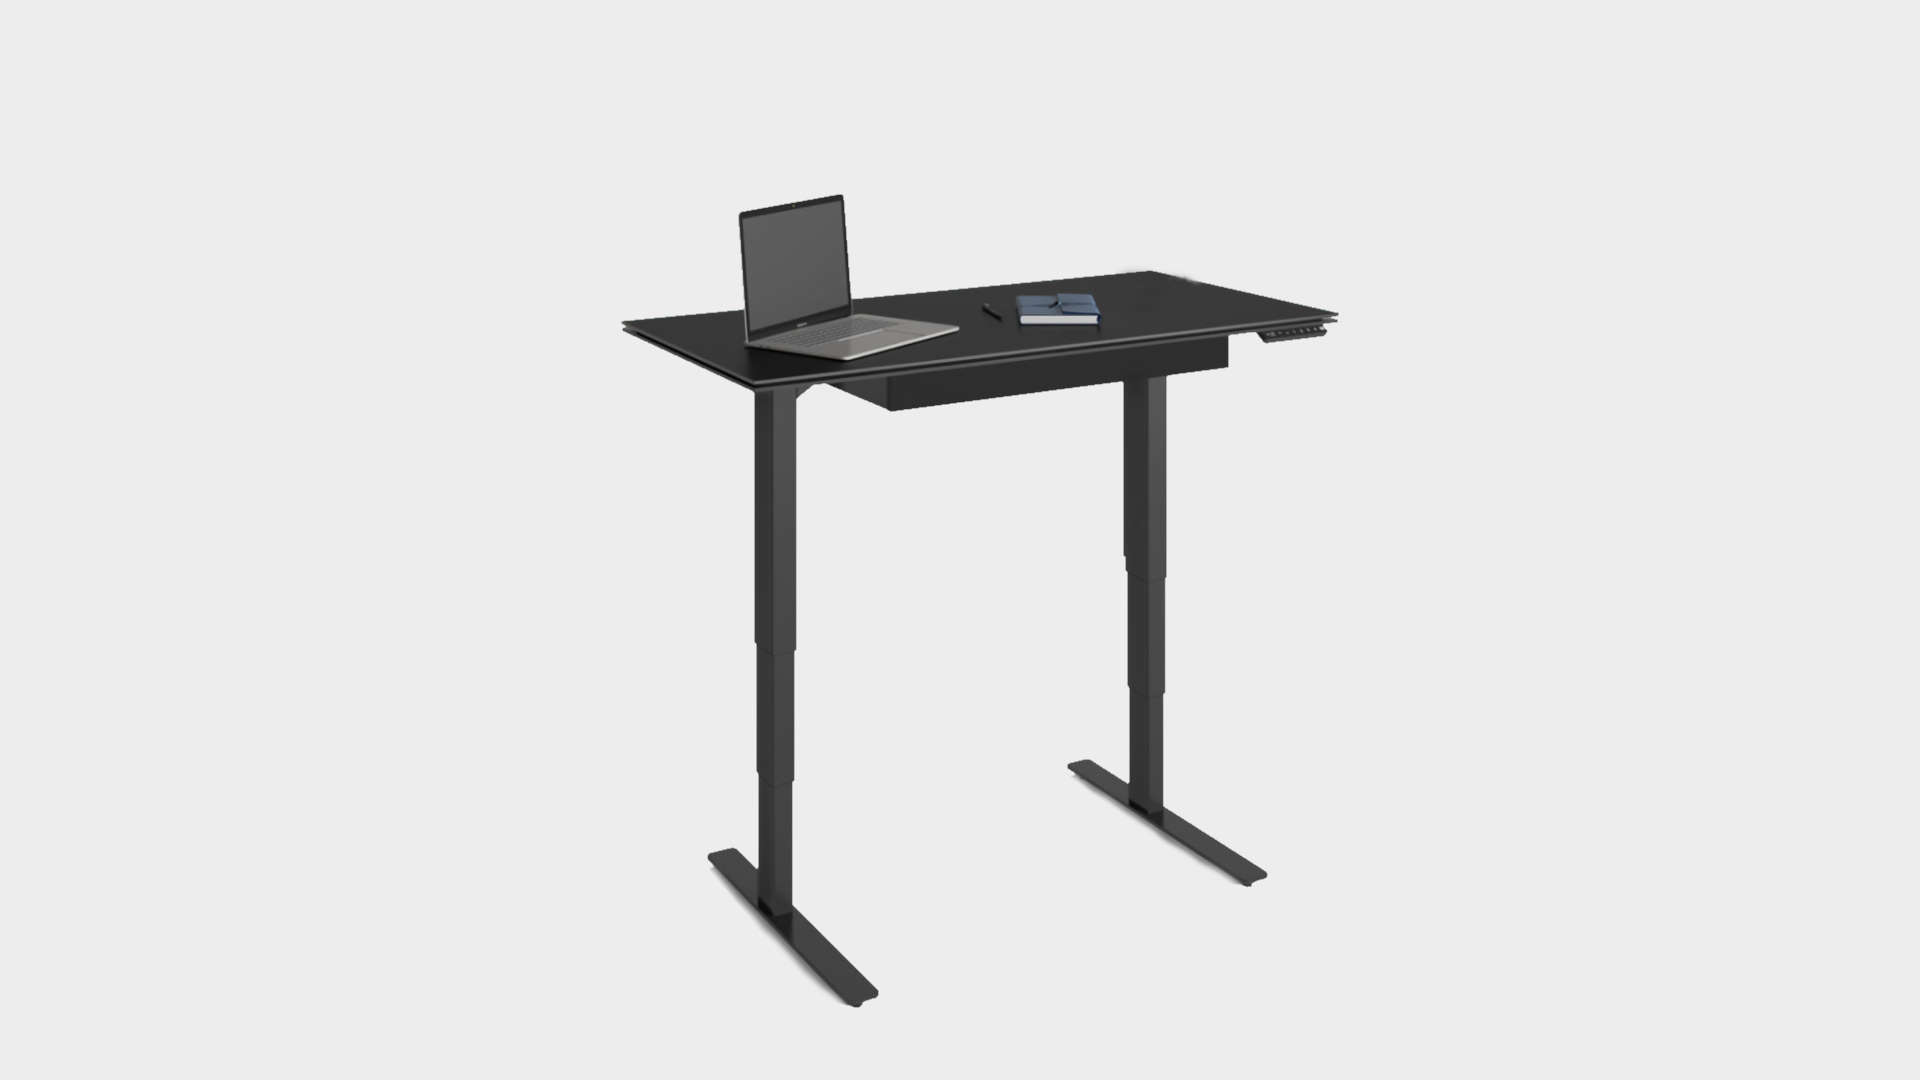 Image of the BDI Stance luxury desk in standing mode from the front at an angle.